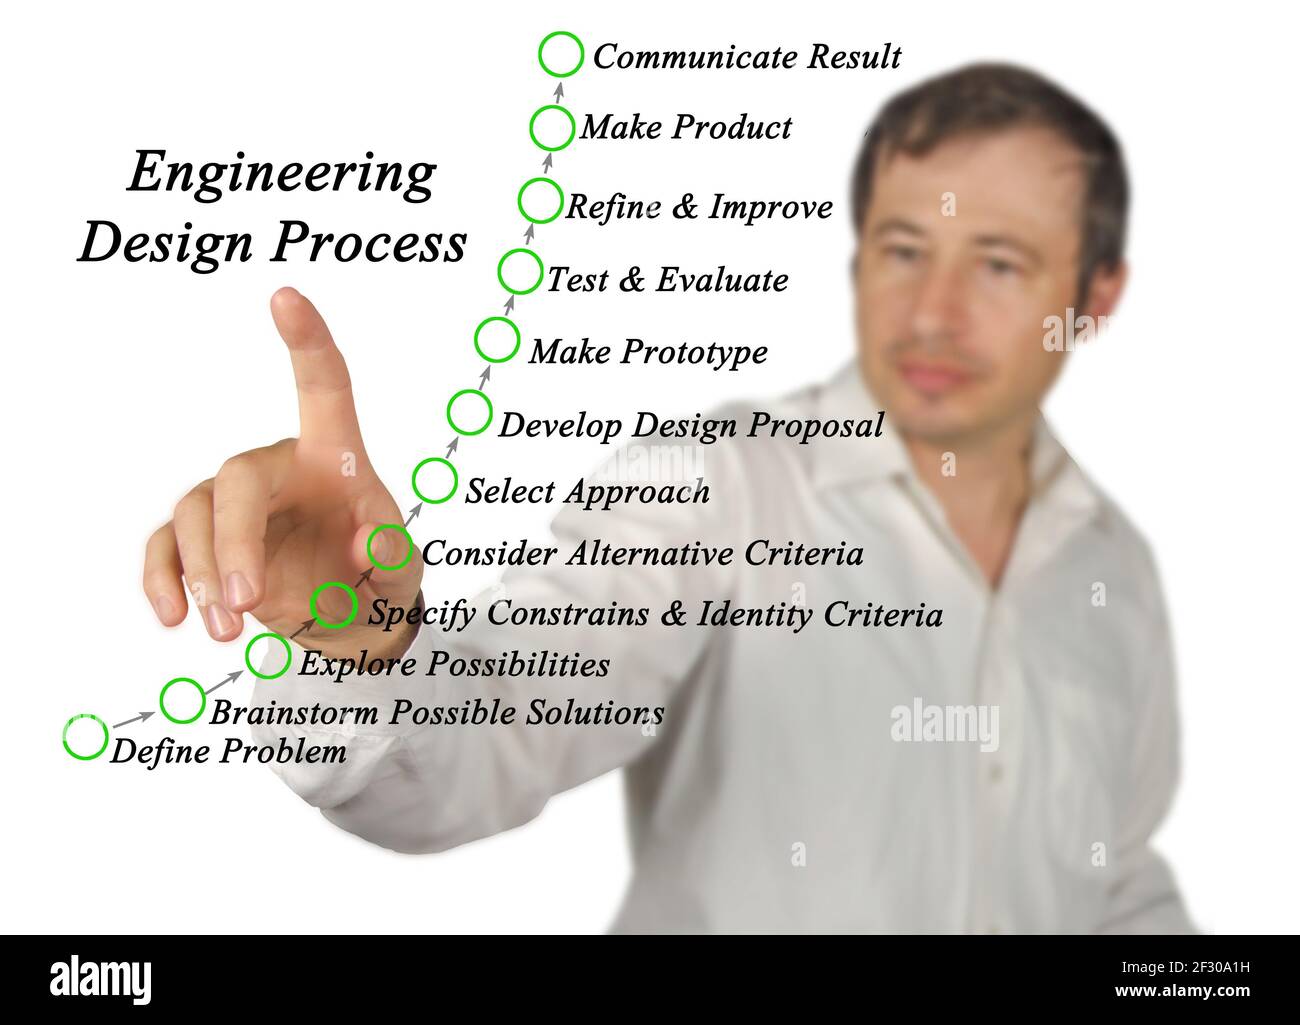 Components of Engineering Design Process Stock Photo